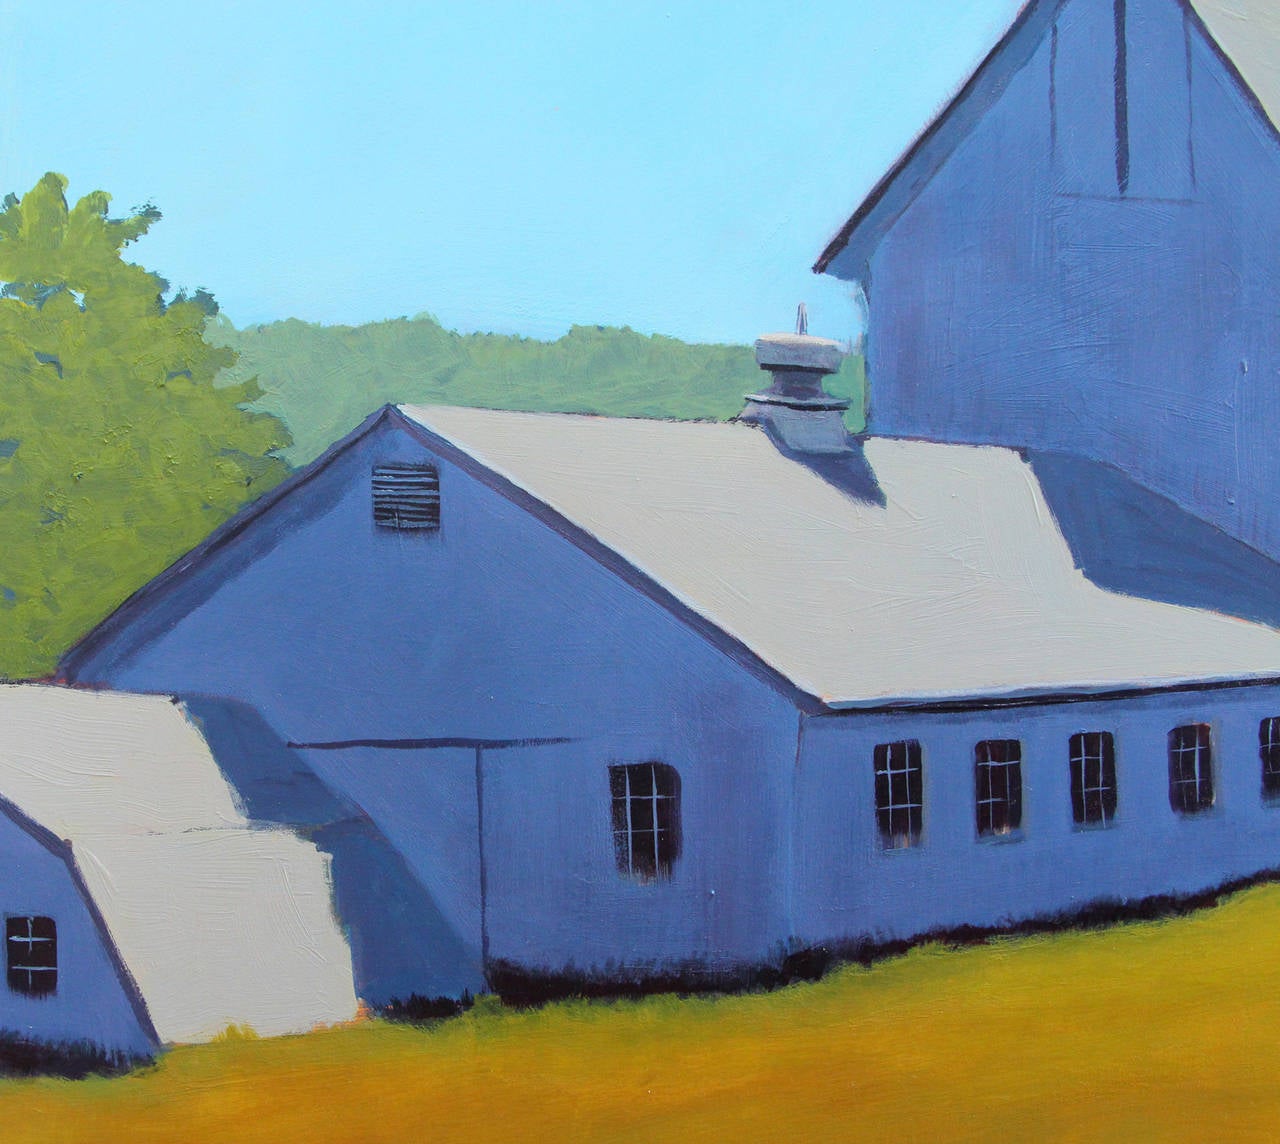 Carol C. Young is landscape painter working in acrylics and oils. She is a plein air painter as well as a studio artist whose work is primarily identified by a bold use of light and shadow along with iconic depictions of the rural landscape.
A fine